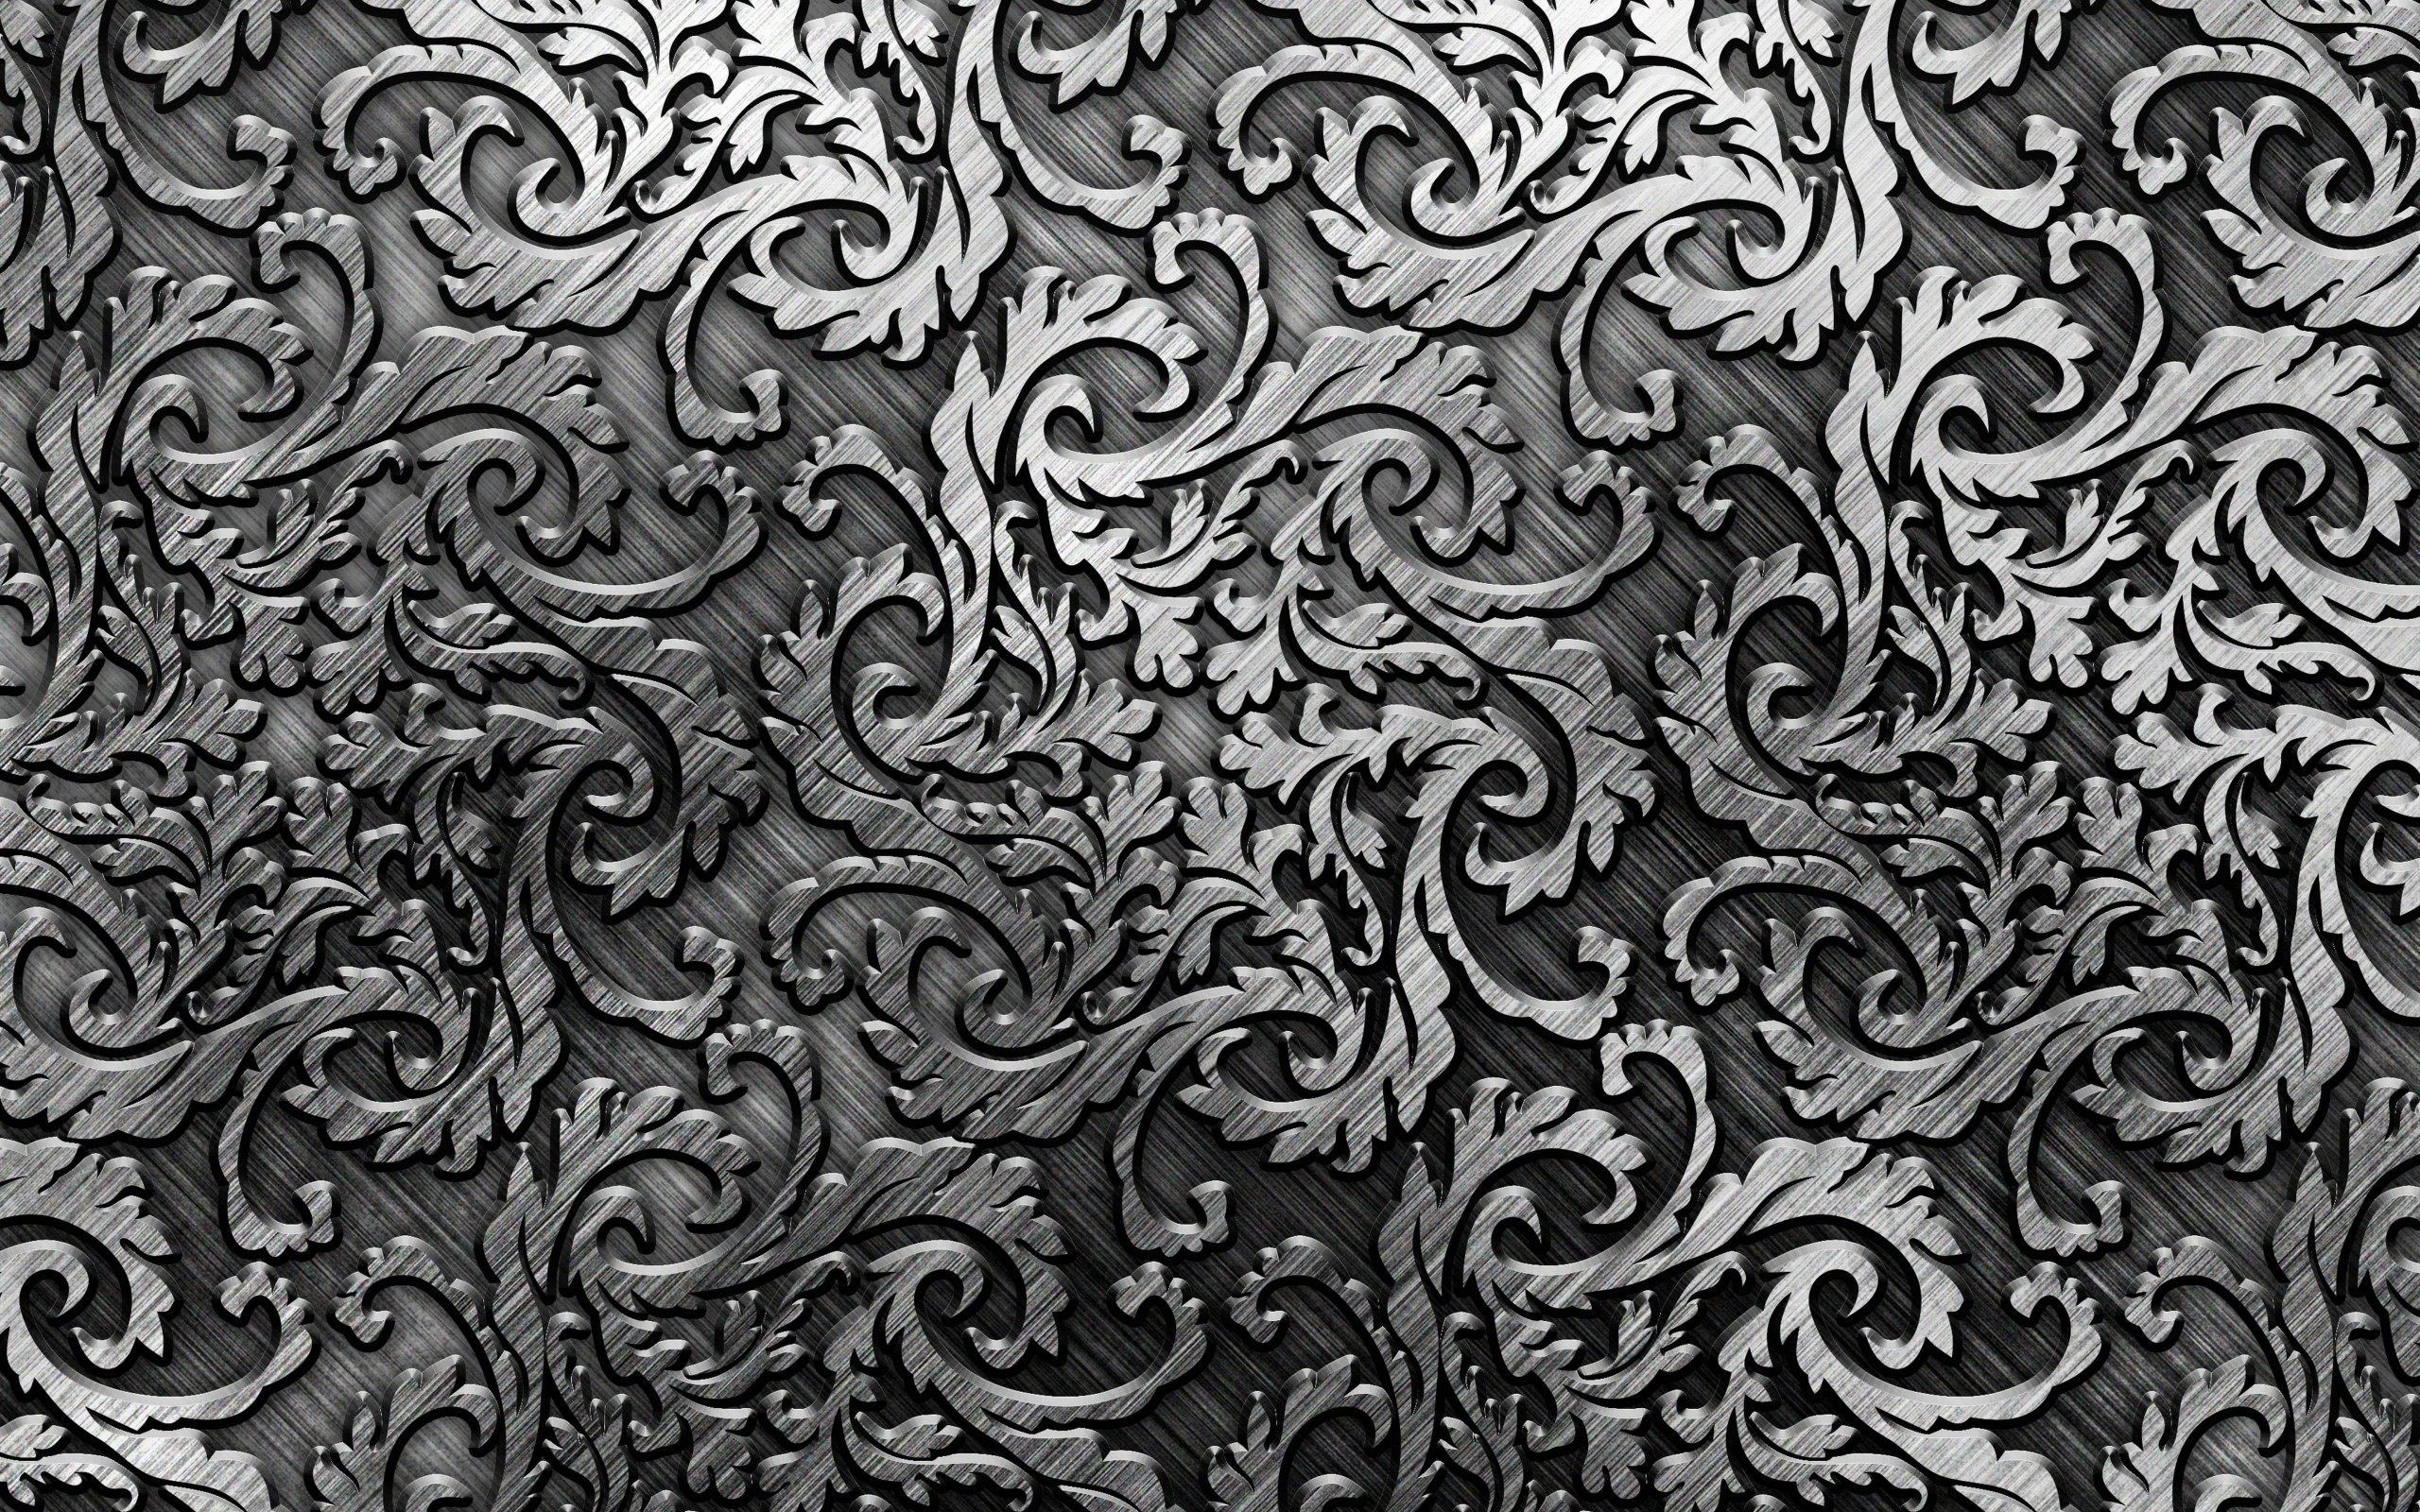 Download wallpapers floral metal patterns, macro, silver metal pattern,  metal background, metallic floral pattern, metal patterns, silver  backgrounds for desktop with resolution 2560x1600. High Quality HD pictures  wallpapers